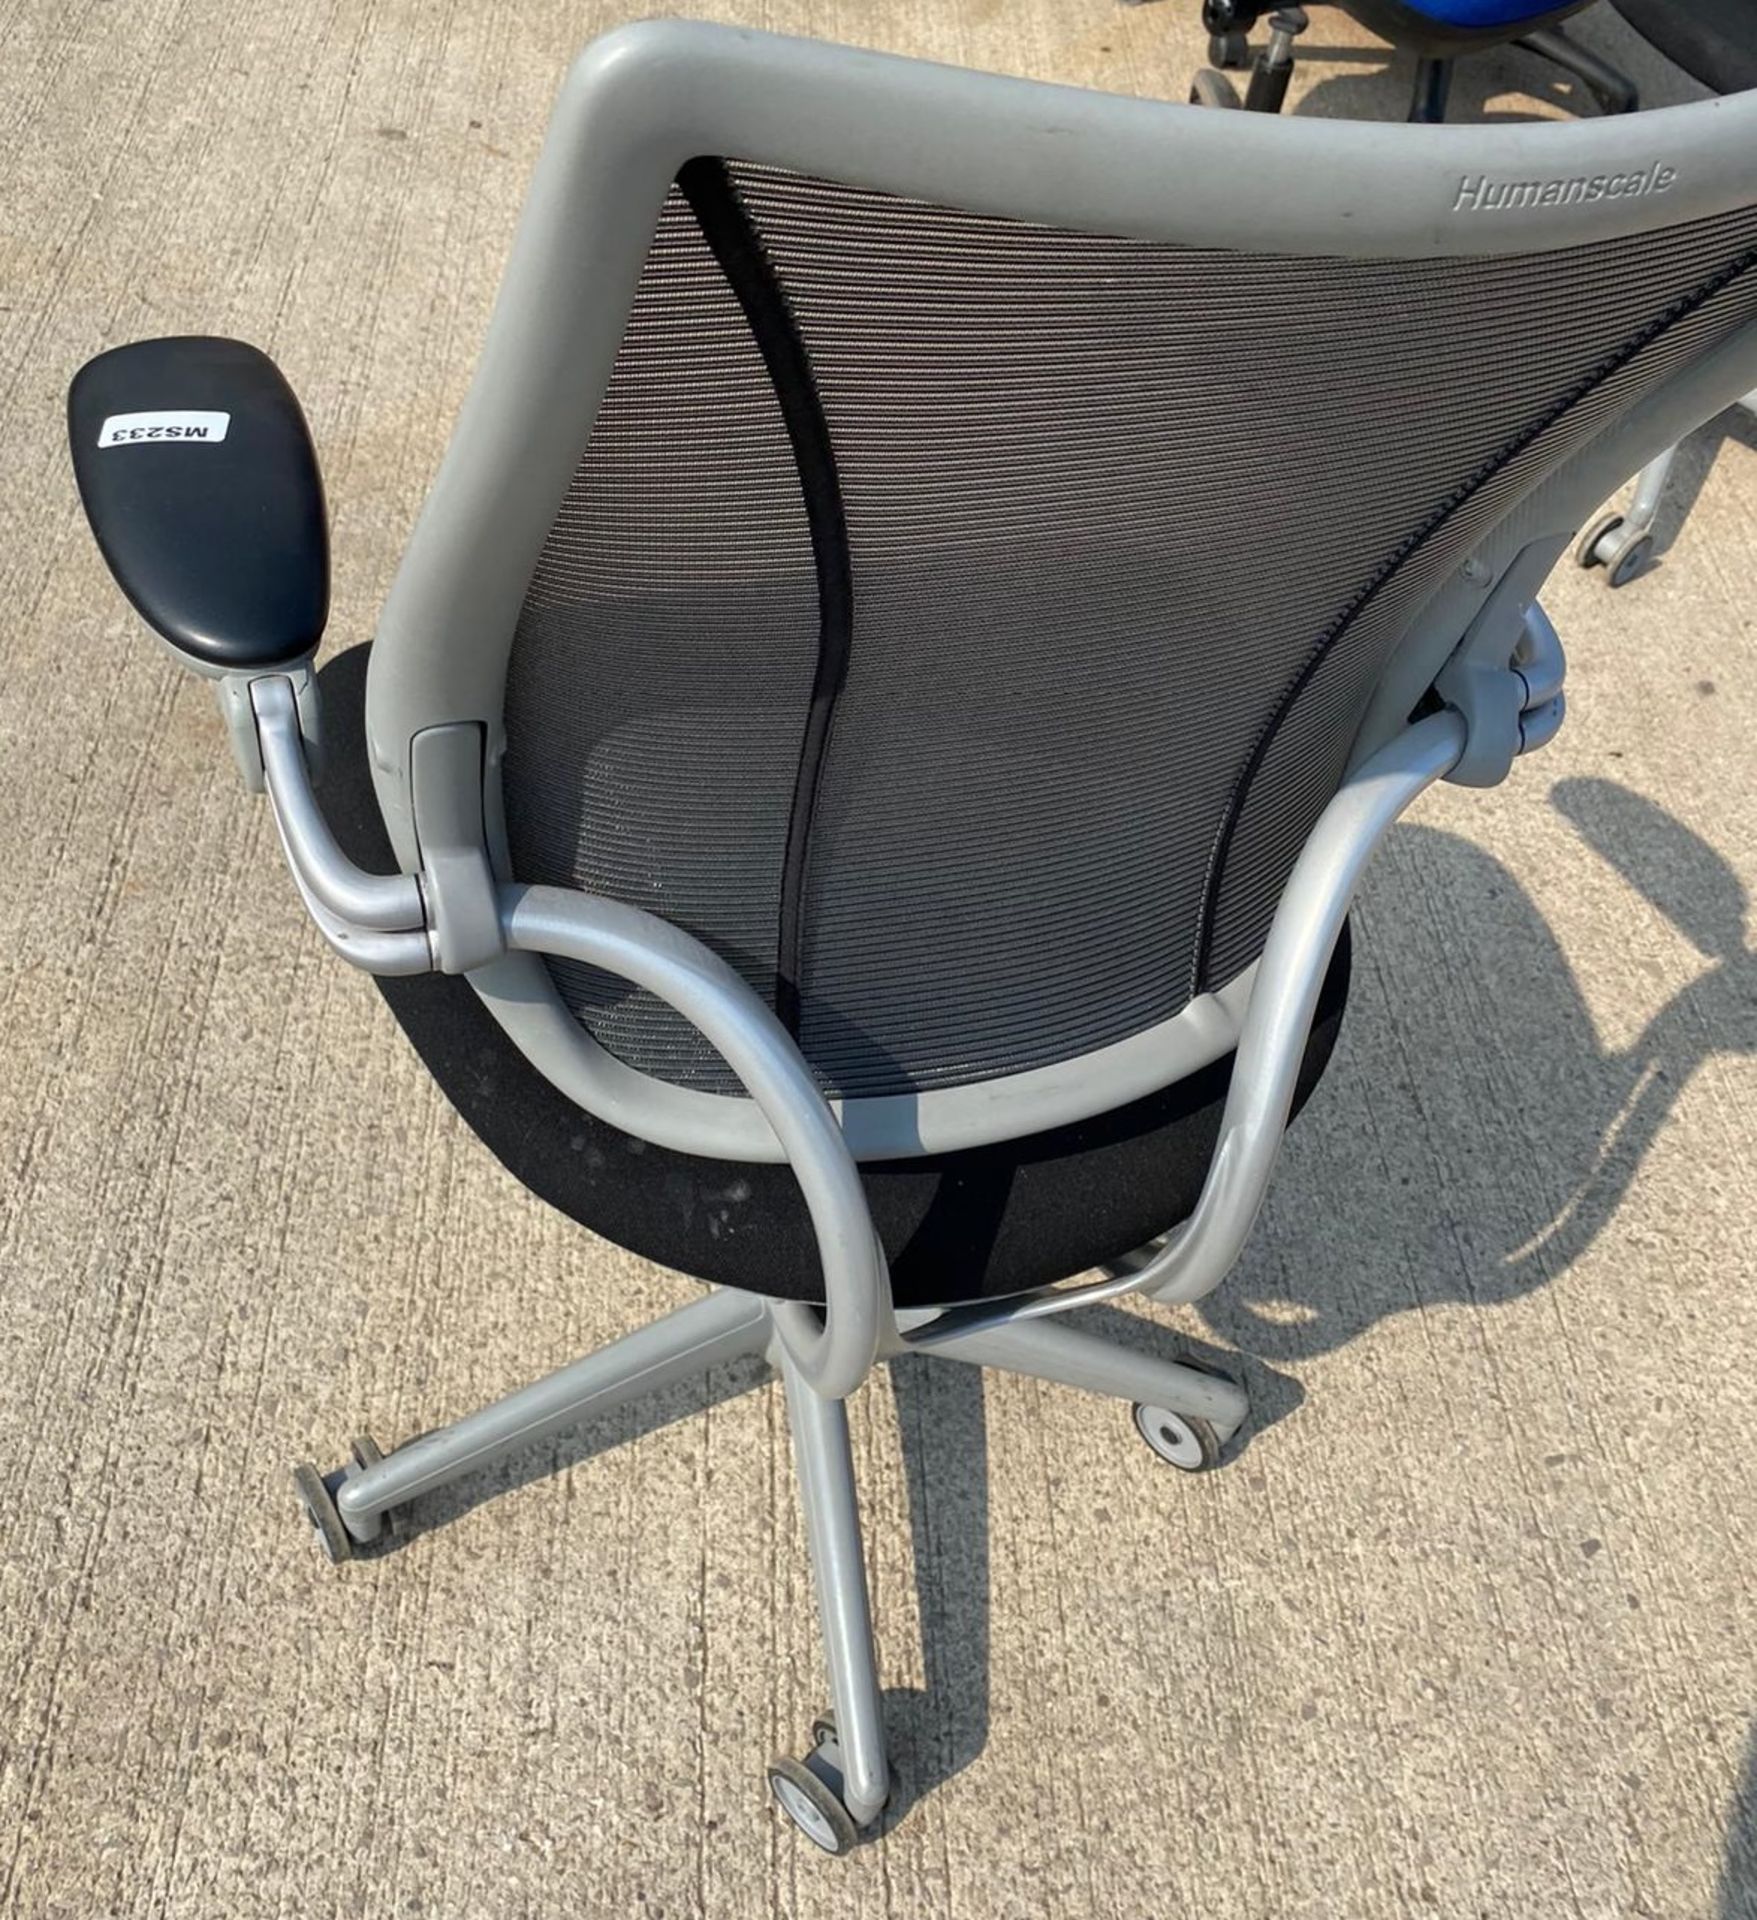 1 x Humanscale Liberty Task Chair in Black and Grey - Used Condition - Location: Altrincham WA14 - - Image 6 of 11